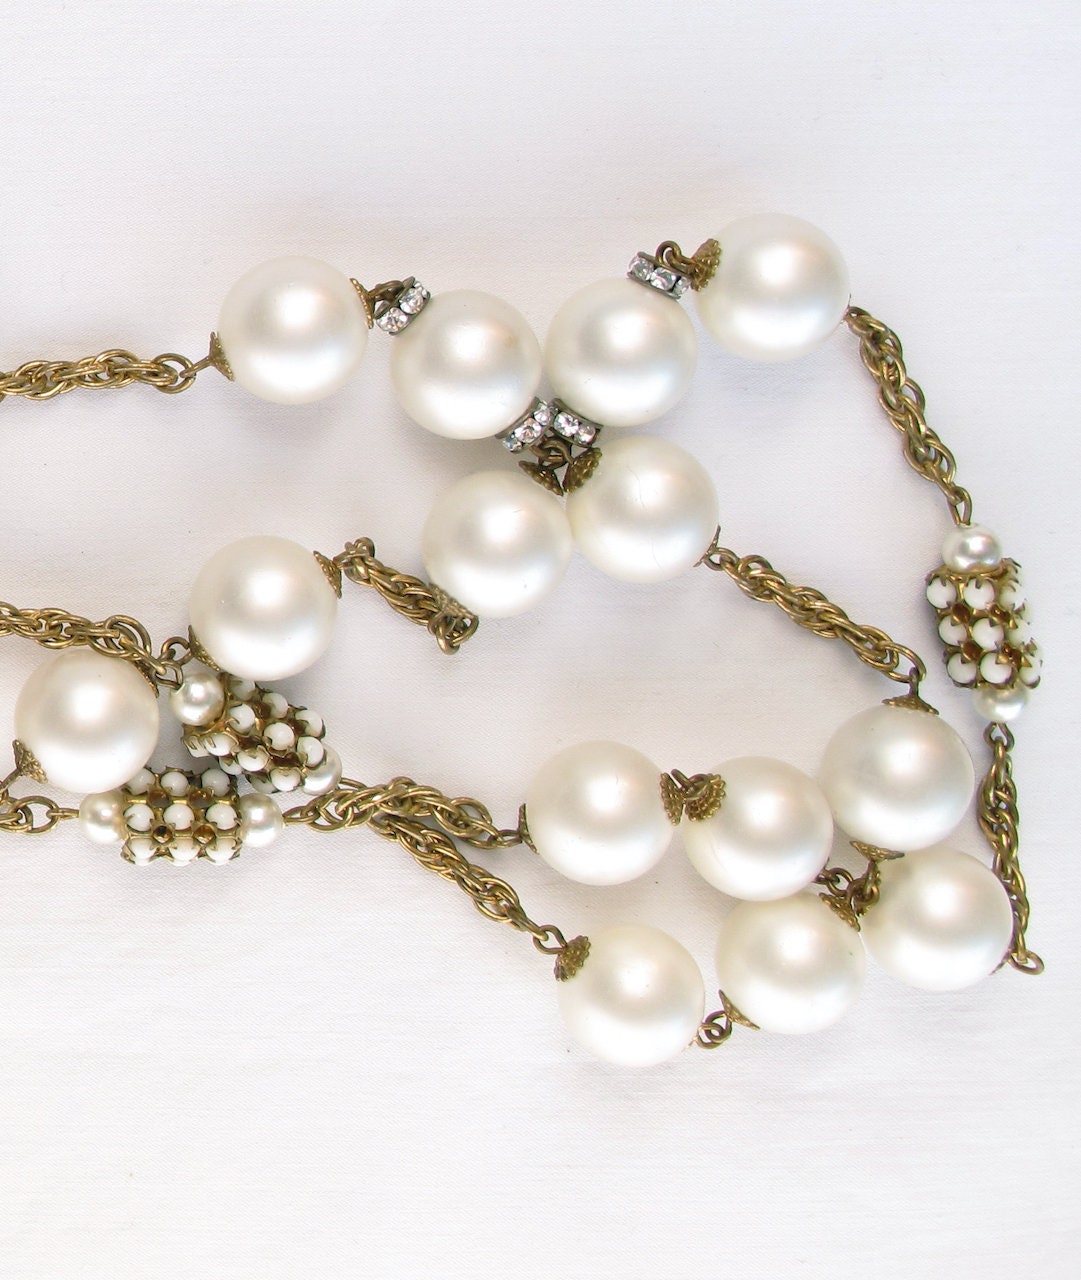 Necklace Haute Couture Faux Pearls Rhinestones Long 57 